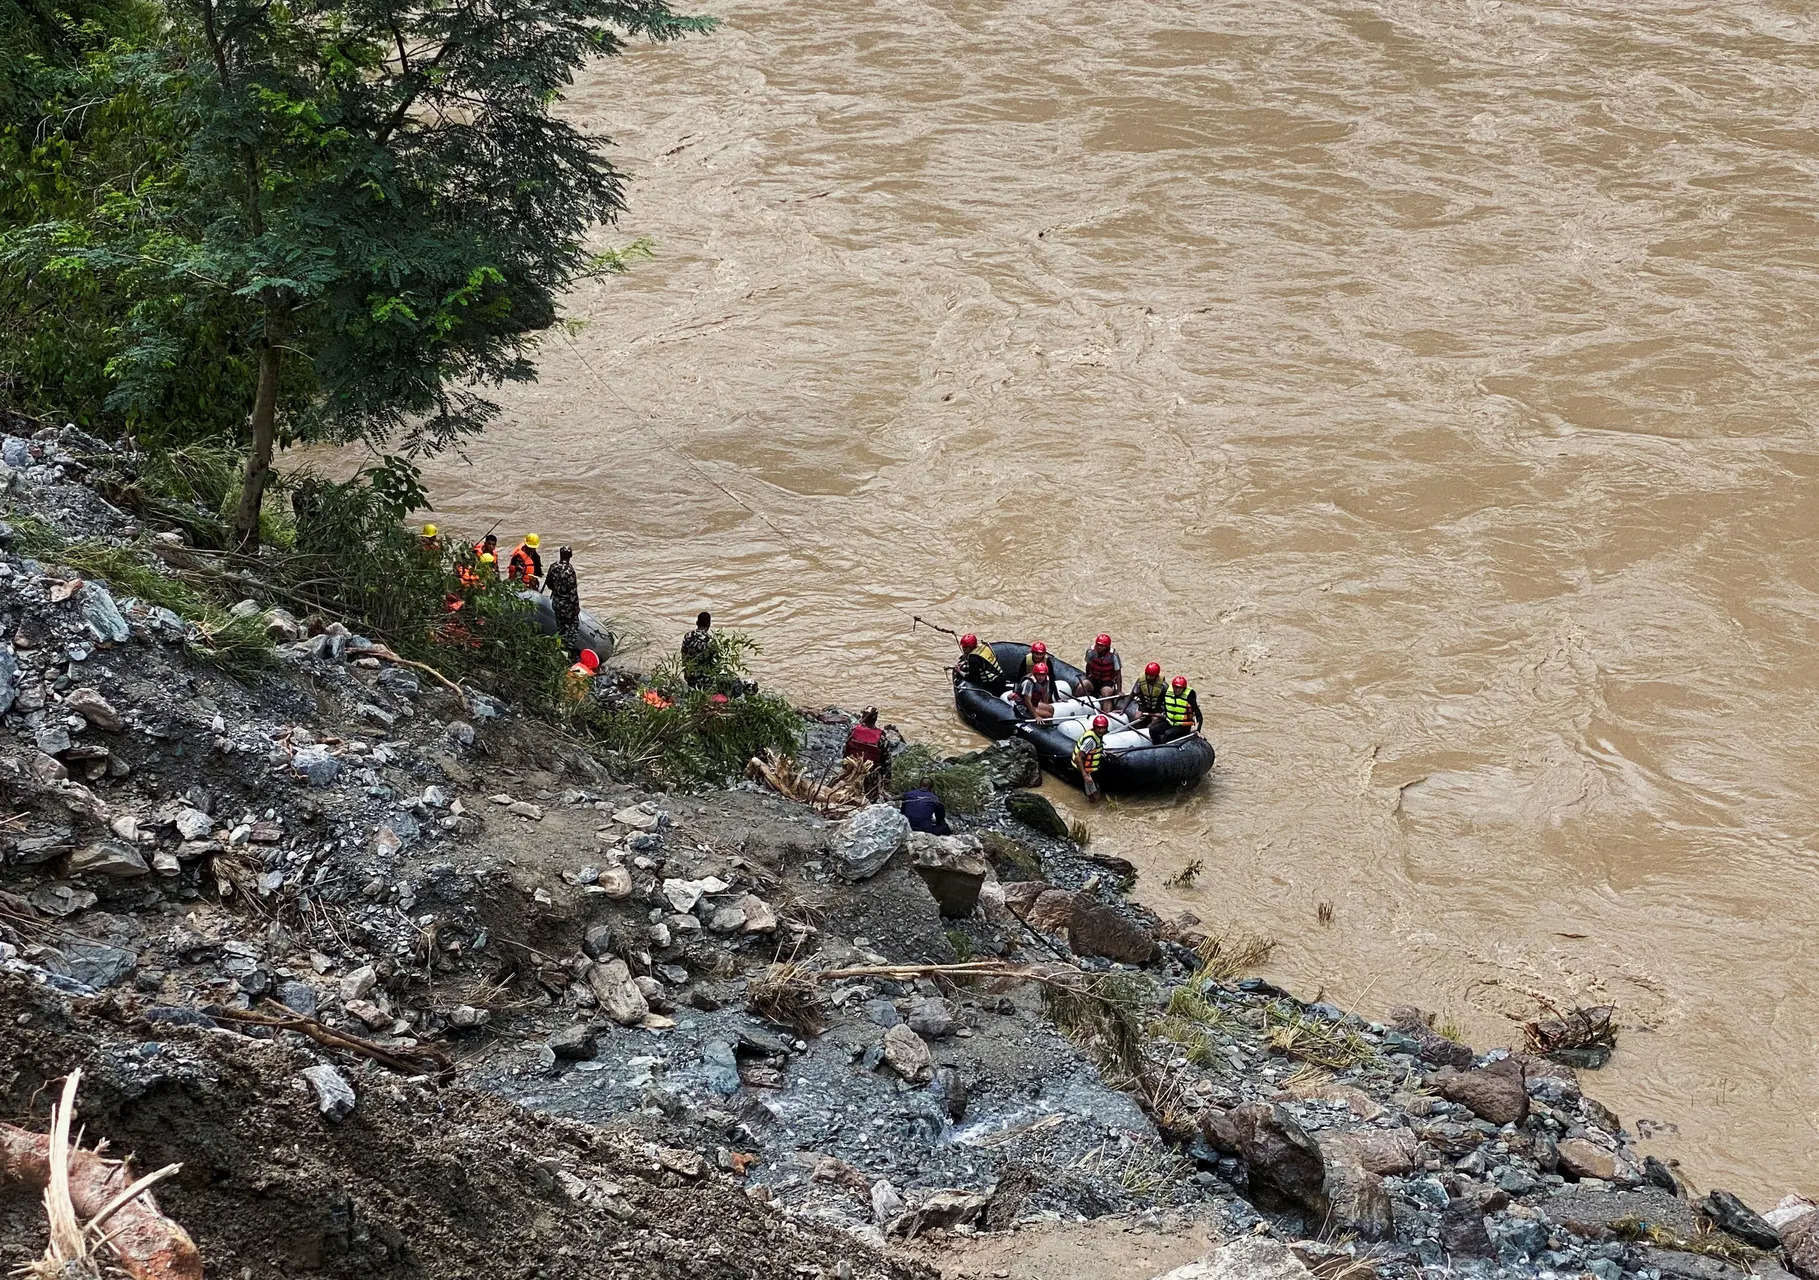 Search for dozens missing after landslide sweeps buses into Nepal river is suspended 